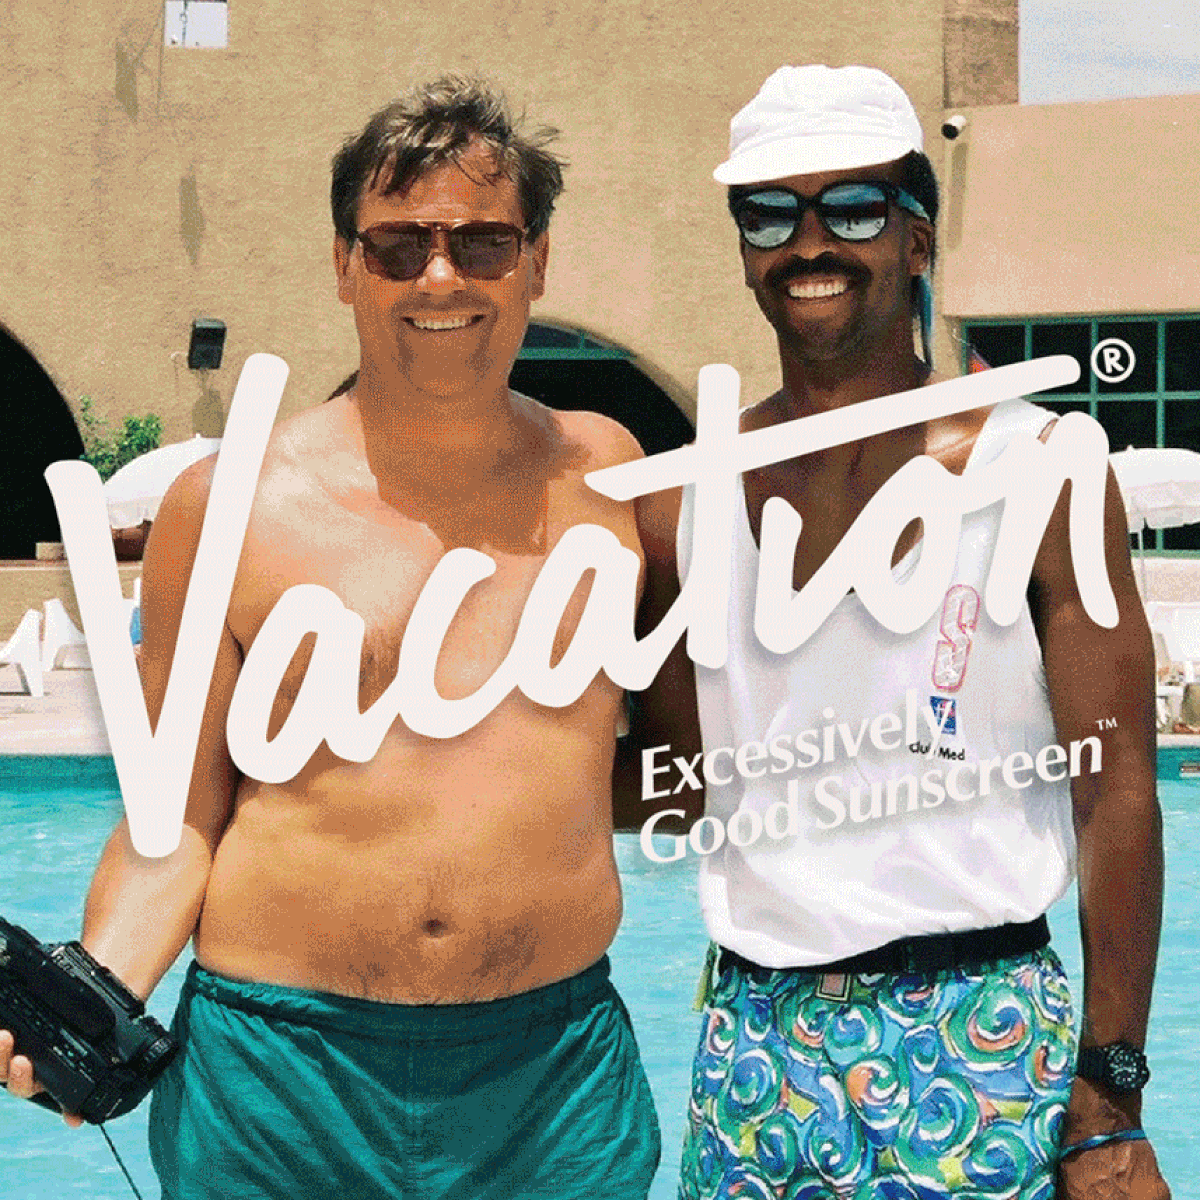 Vacation by Poolsuite, Global